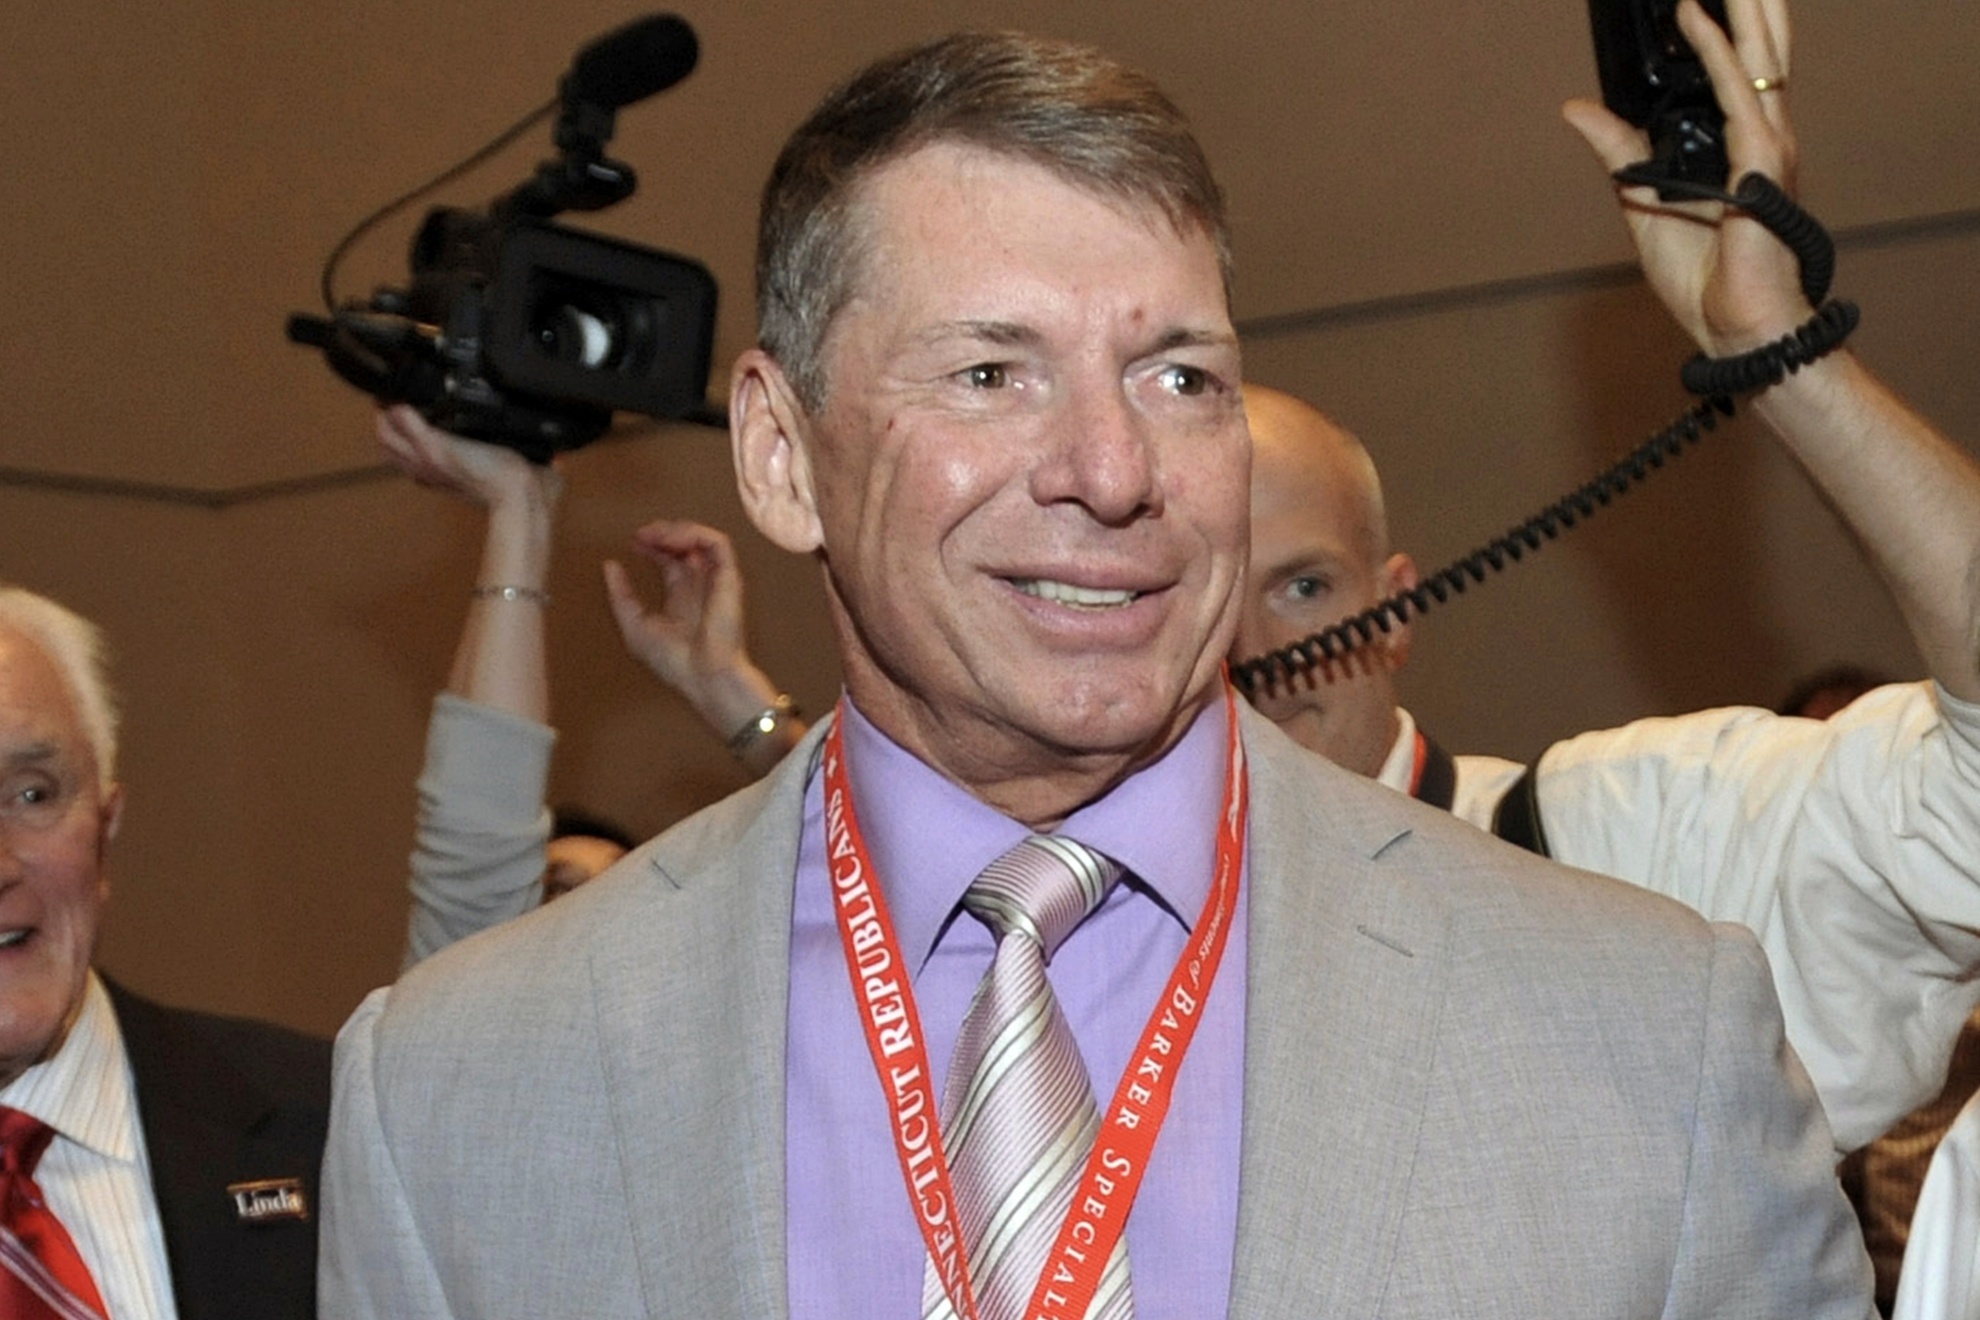 WWE founder Vince McMahon.